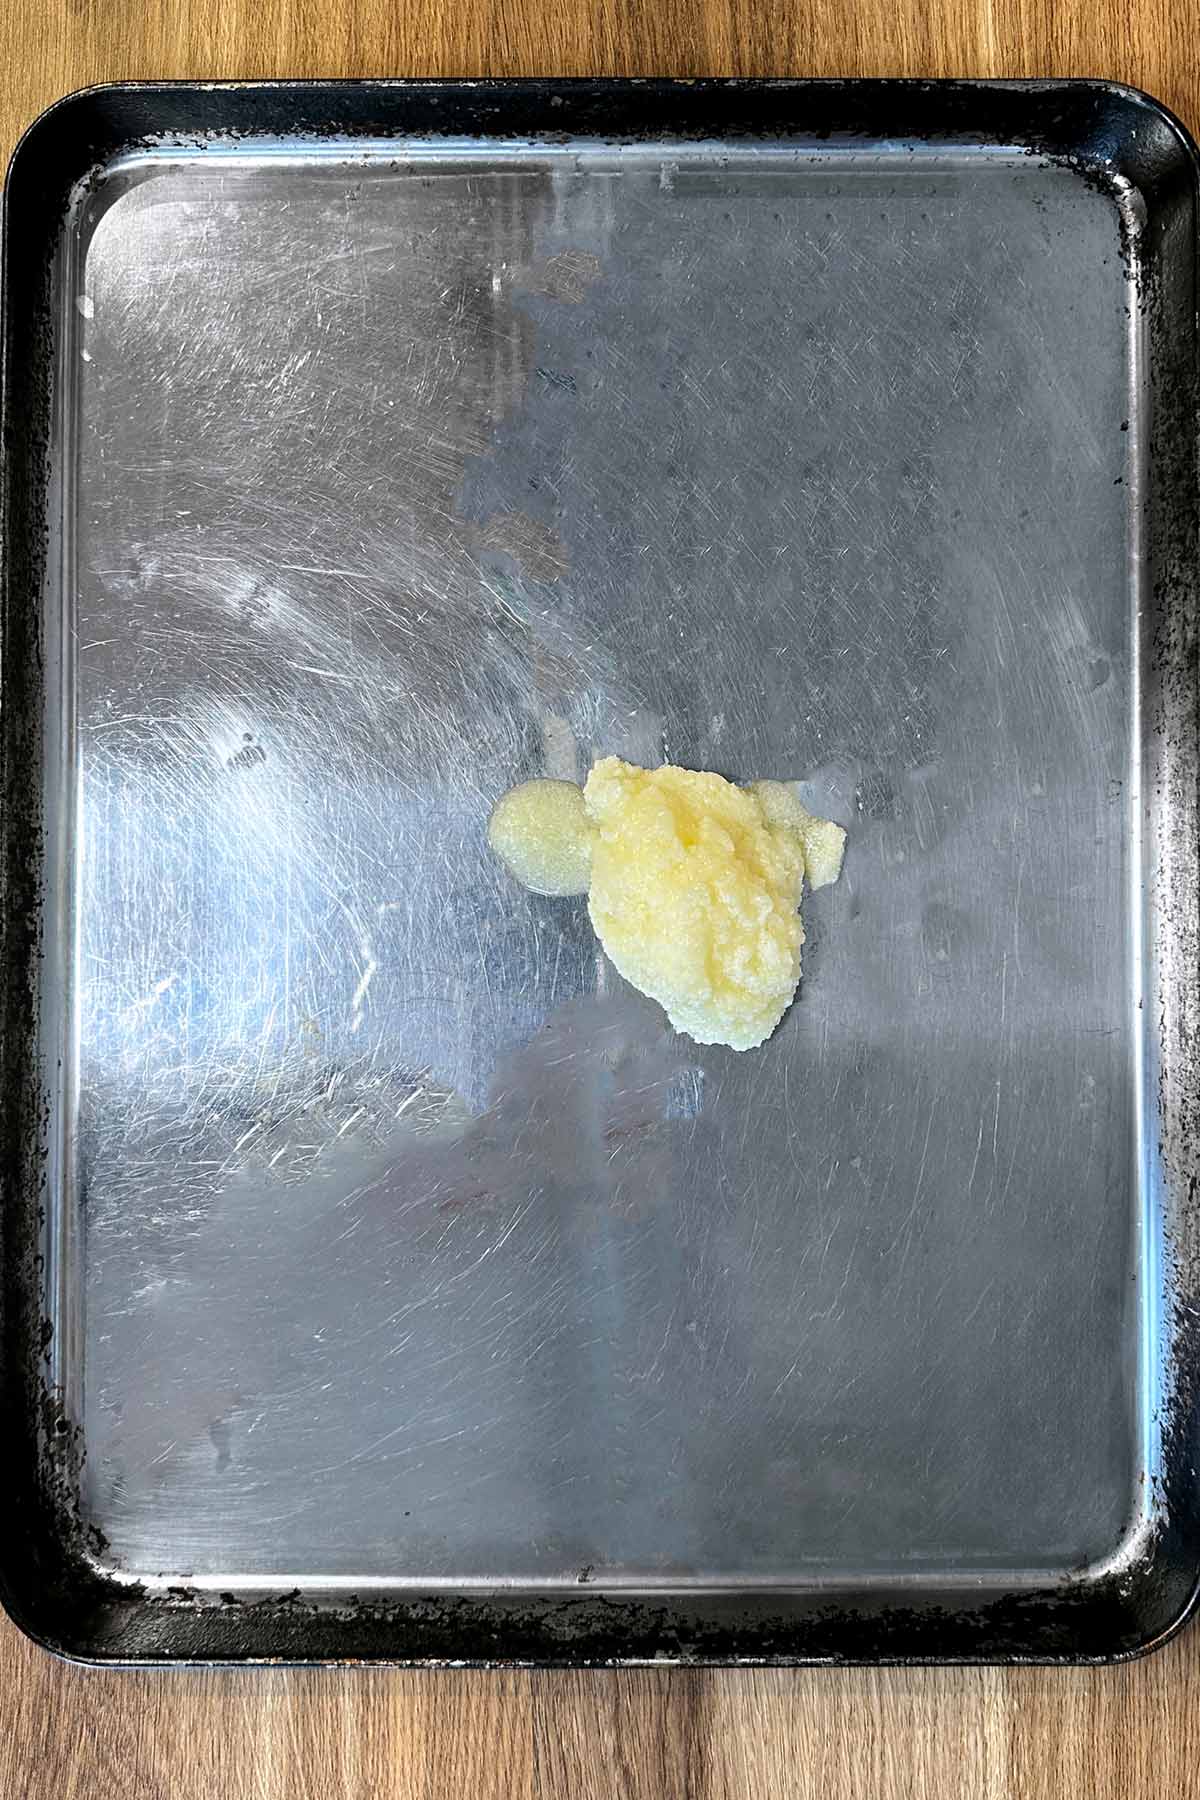 A large dollop of duck fat on a baking tray.